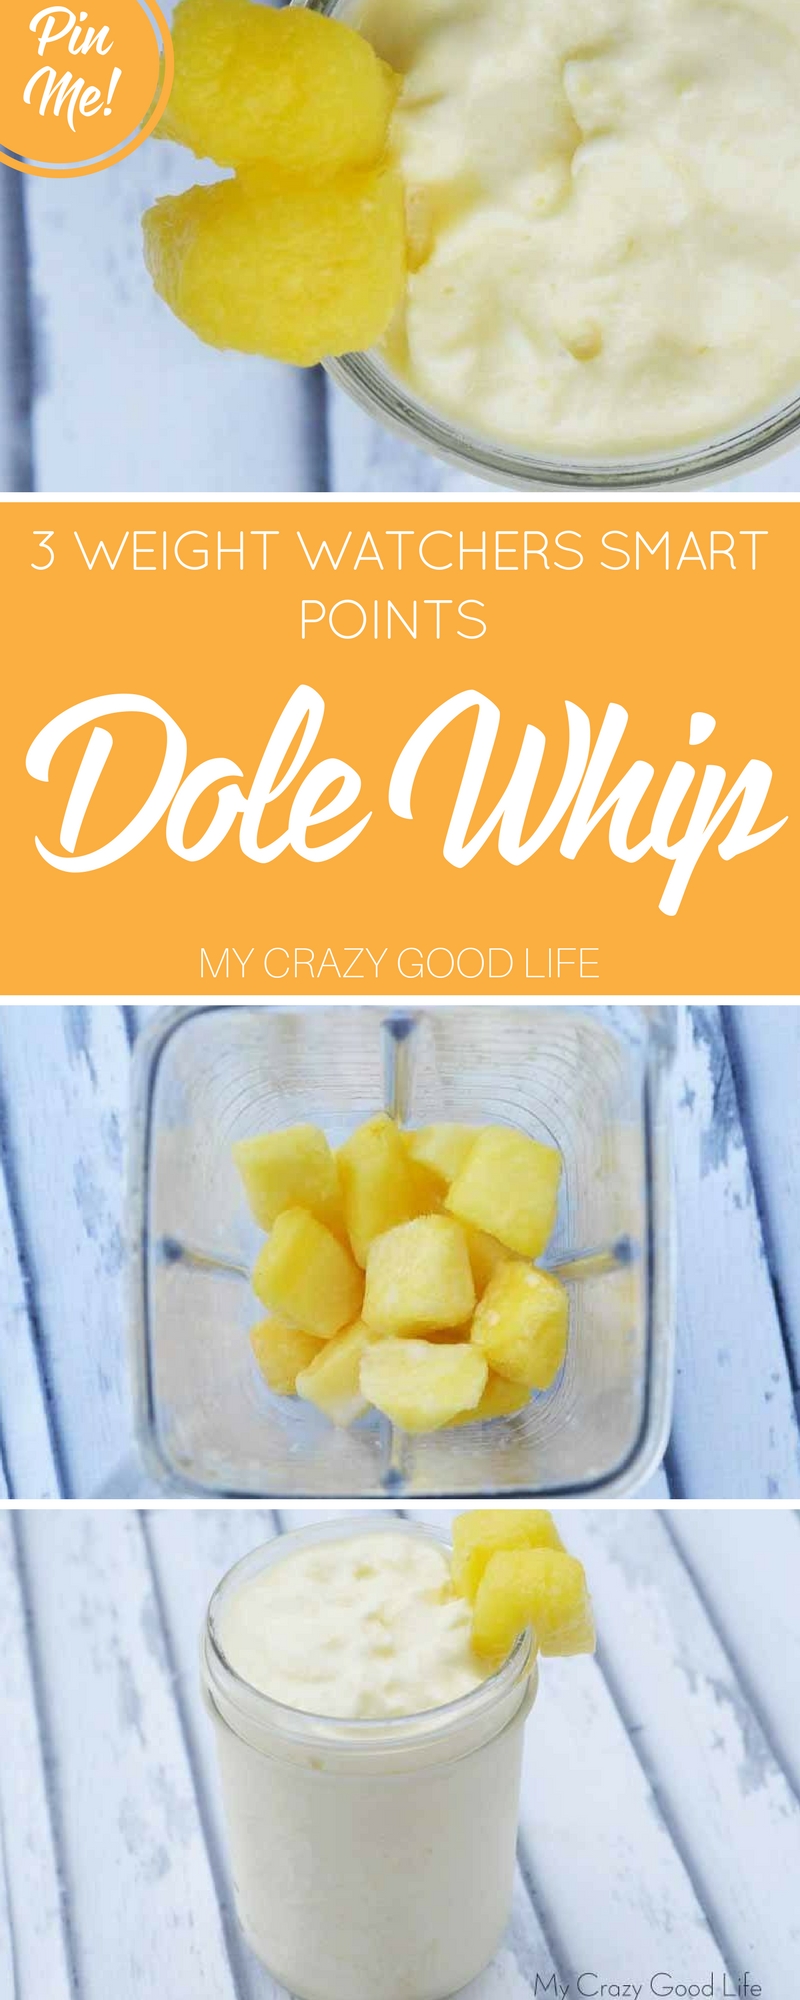 I've shared a delicious dole whip with you in the past but this one is different...This is an awesome variation perfect for Weight Watchers!